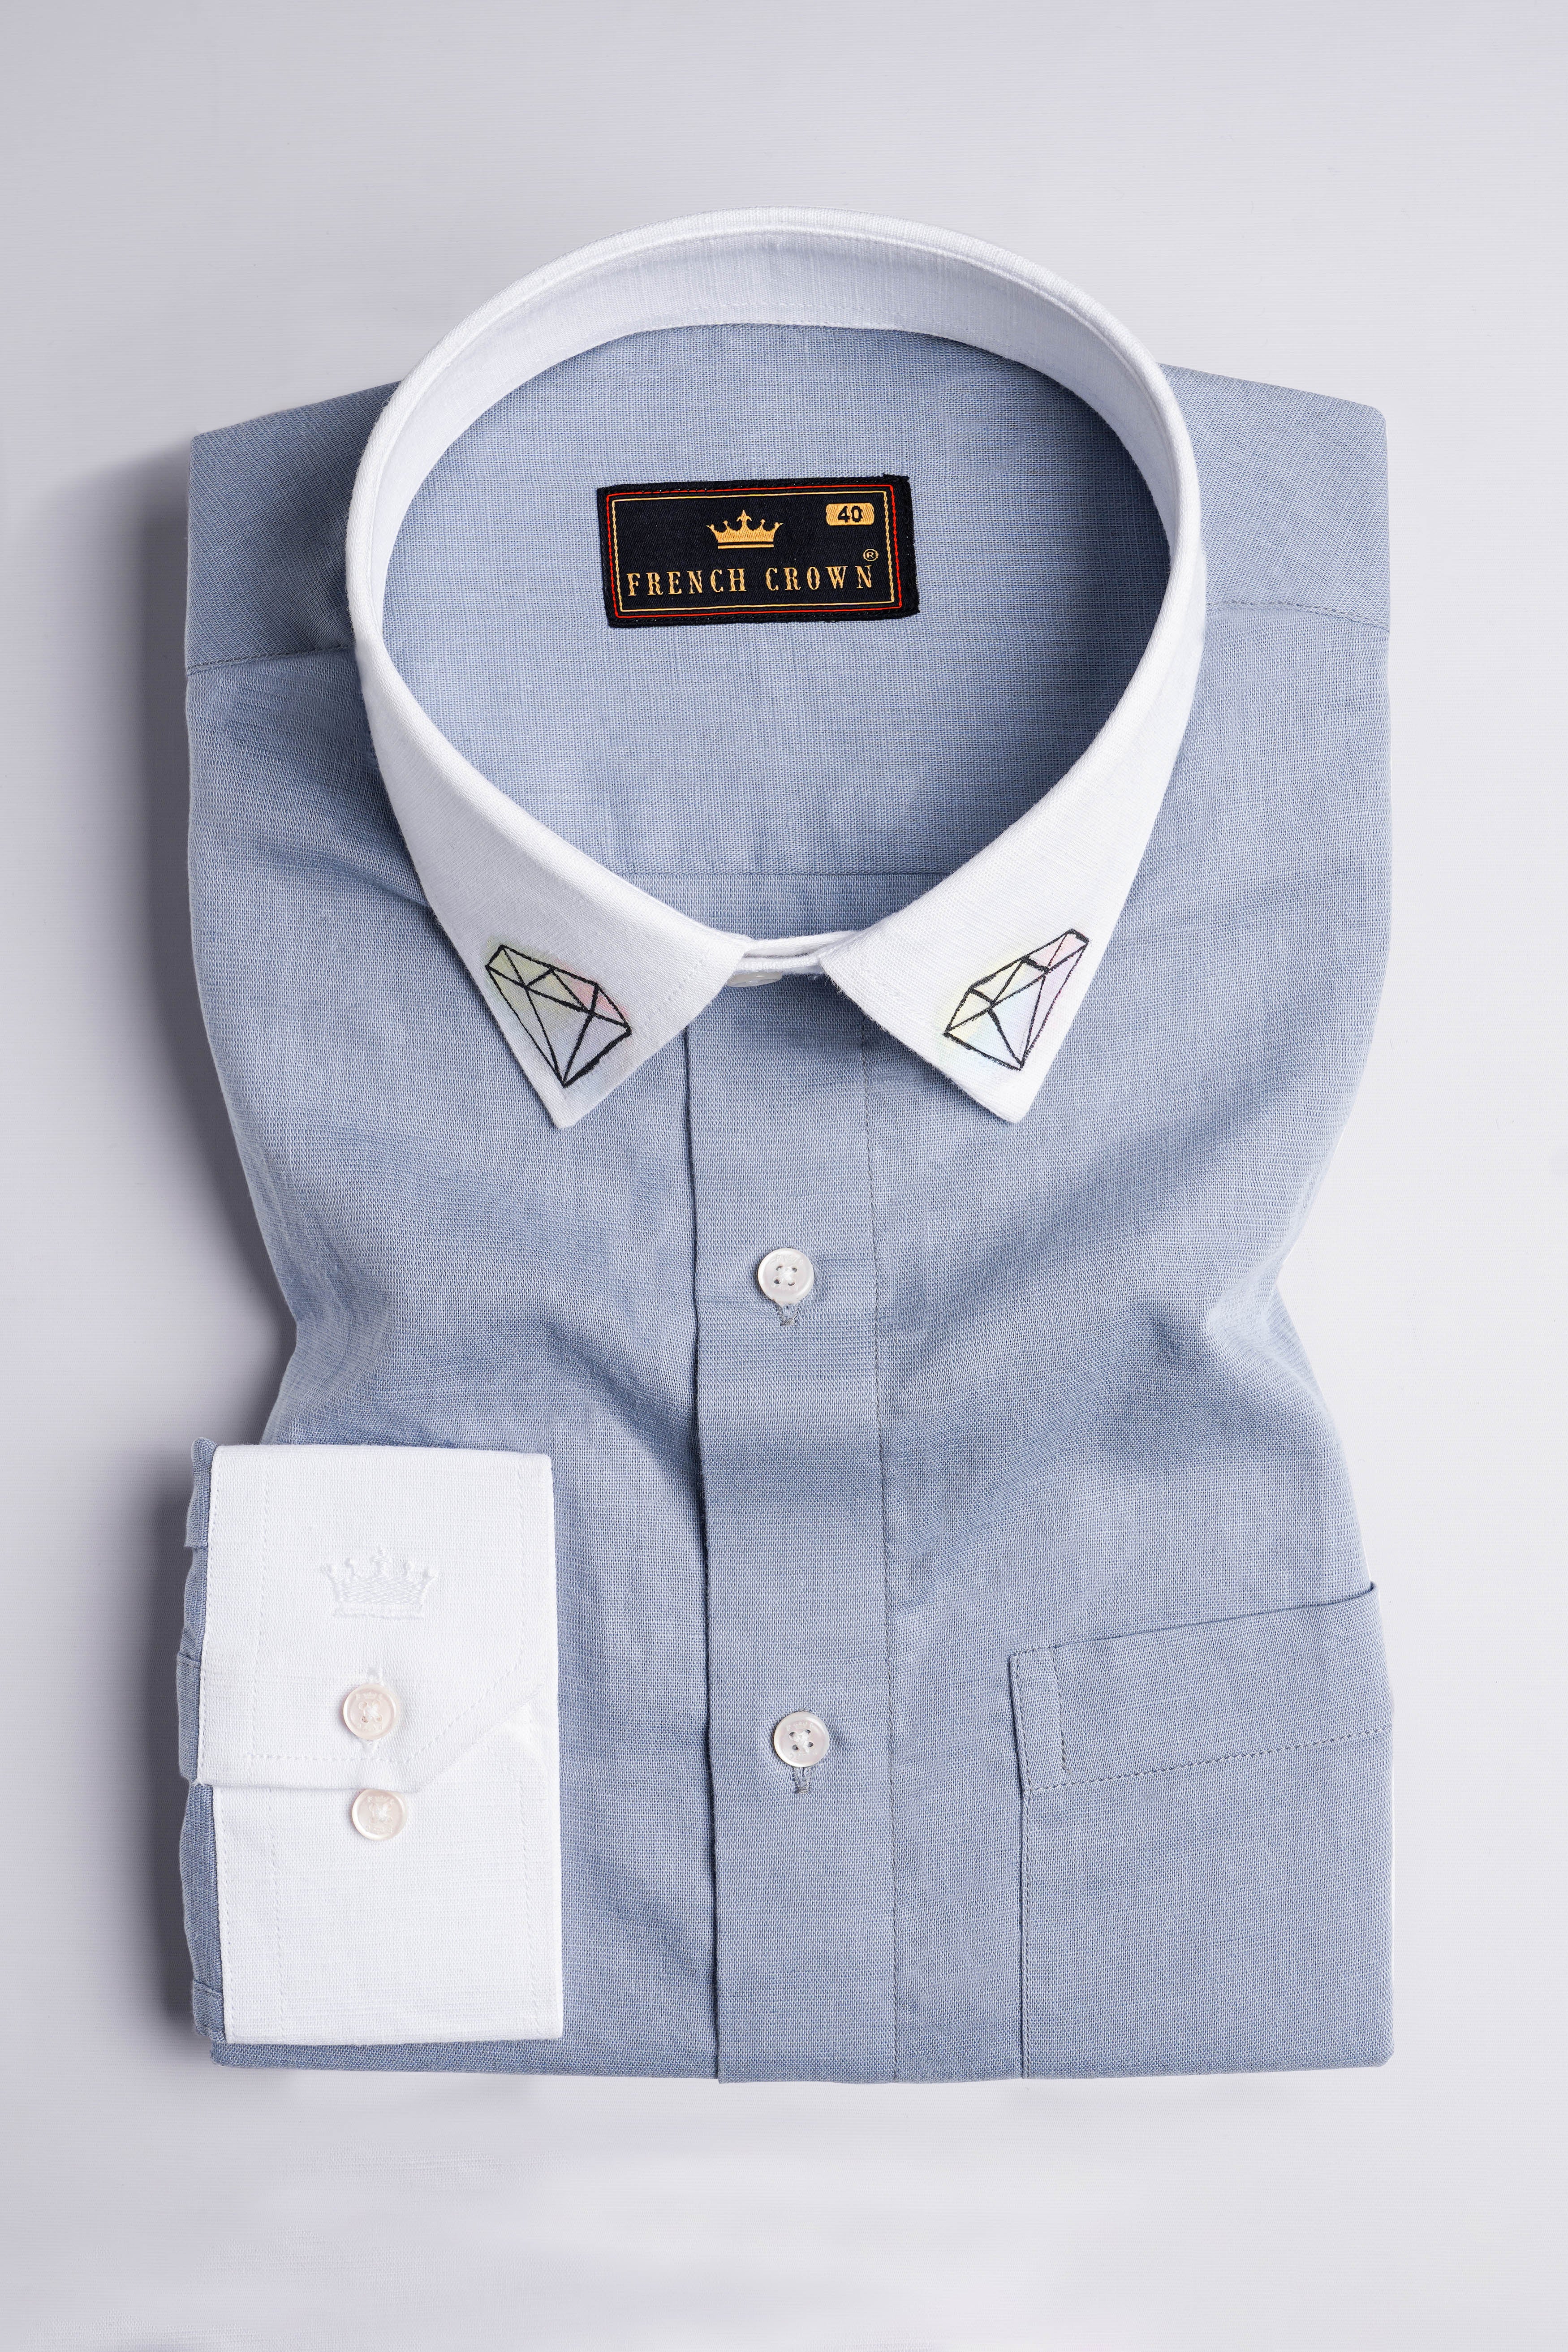 Yonder Blue with White Collar and Cuffs Hand Painted Luxurious Linen Designer Shirt